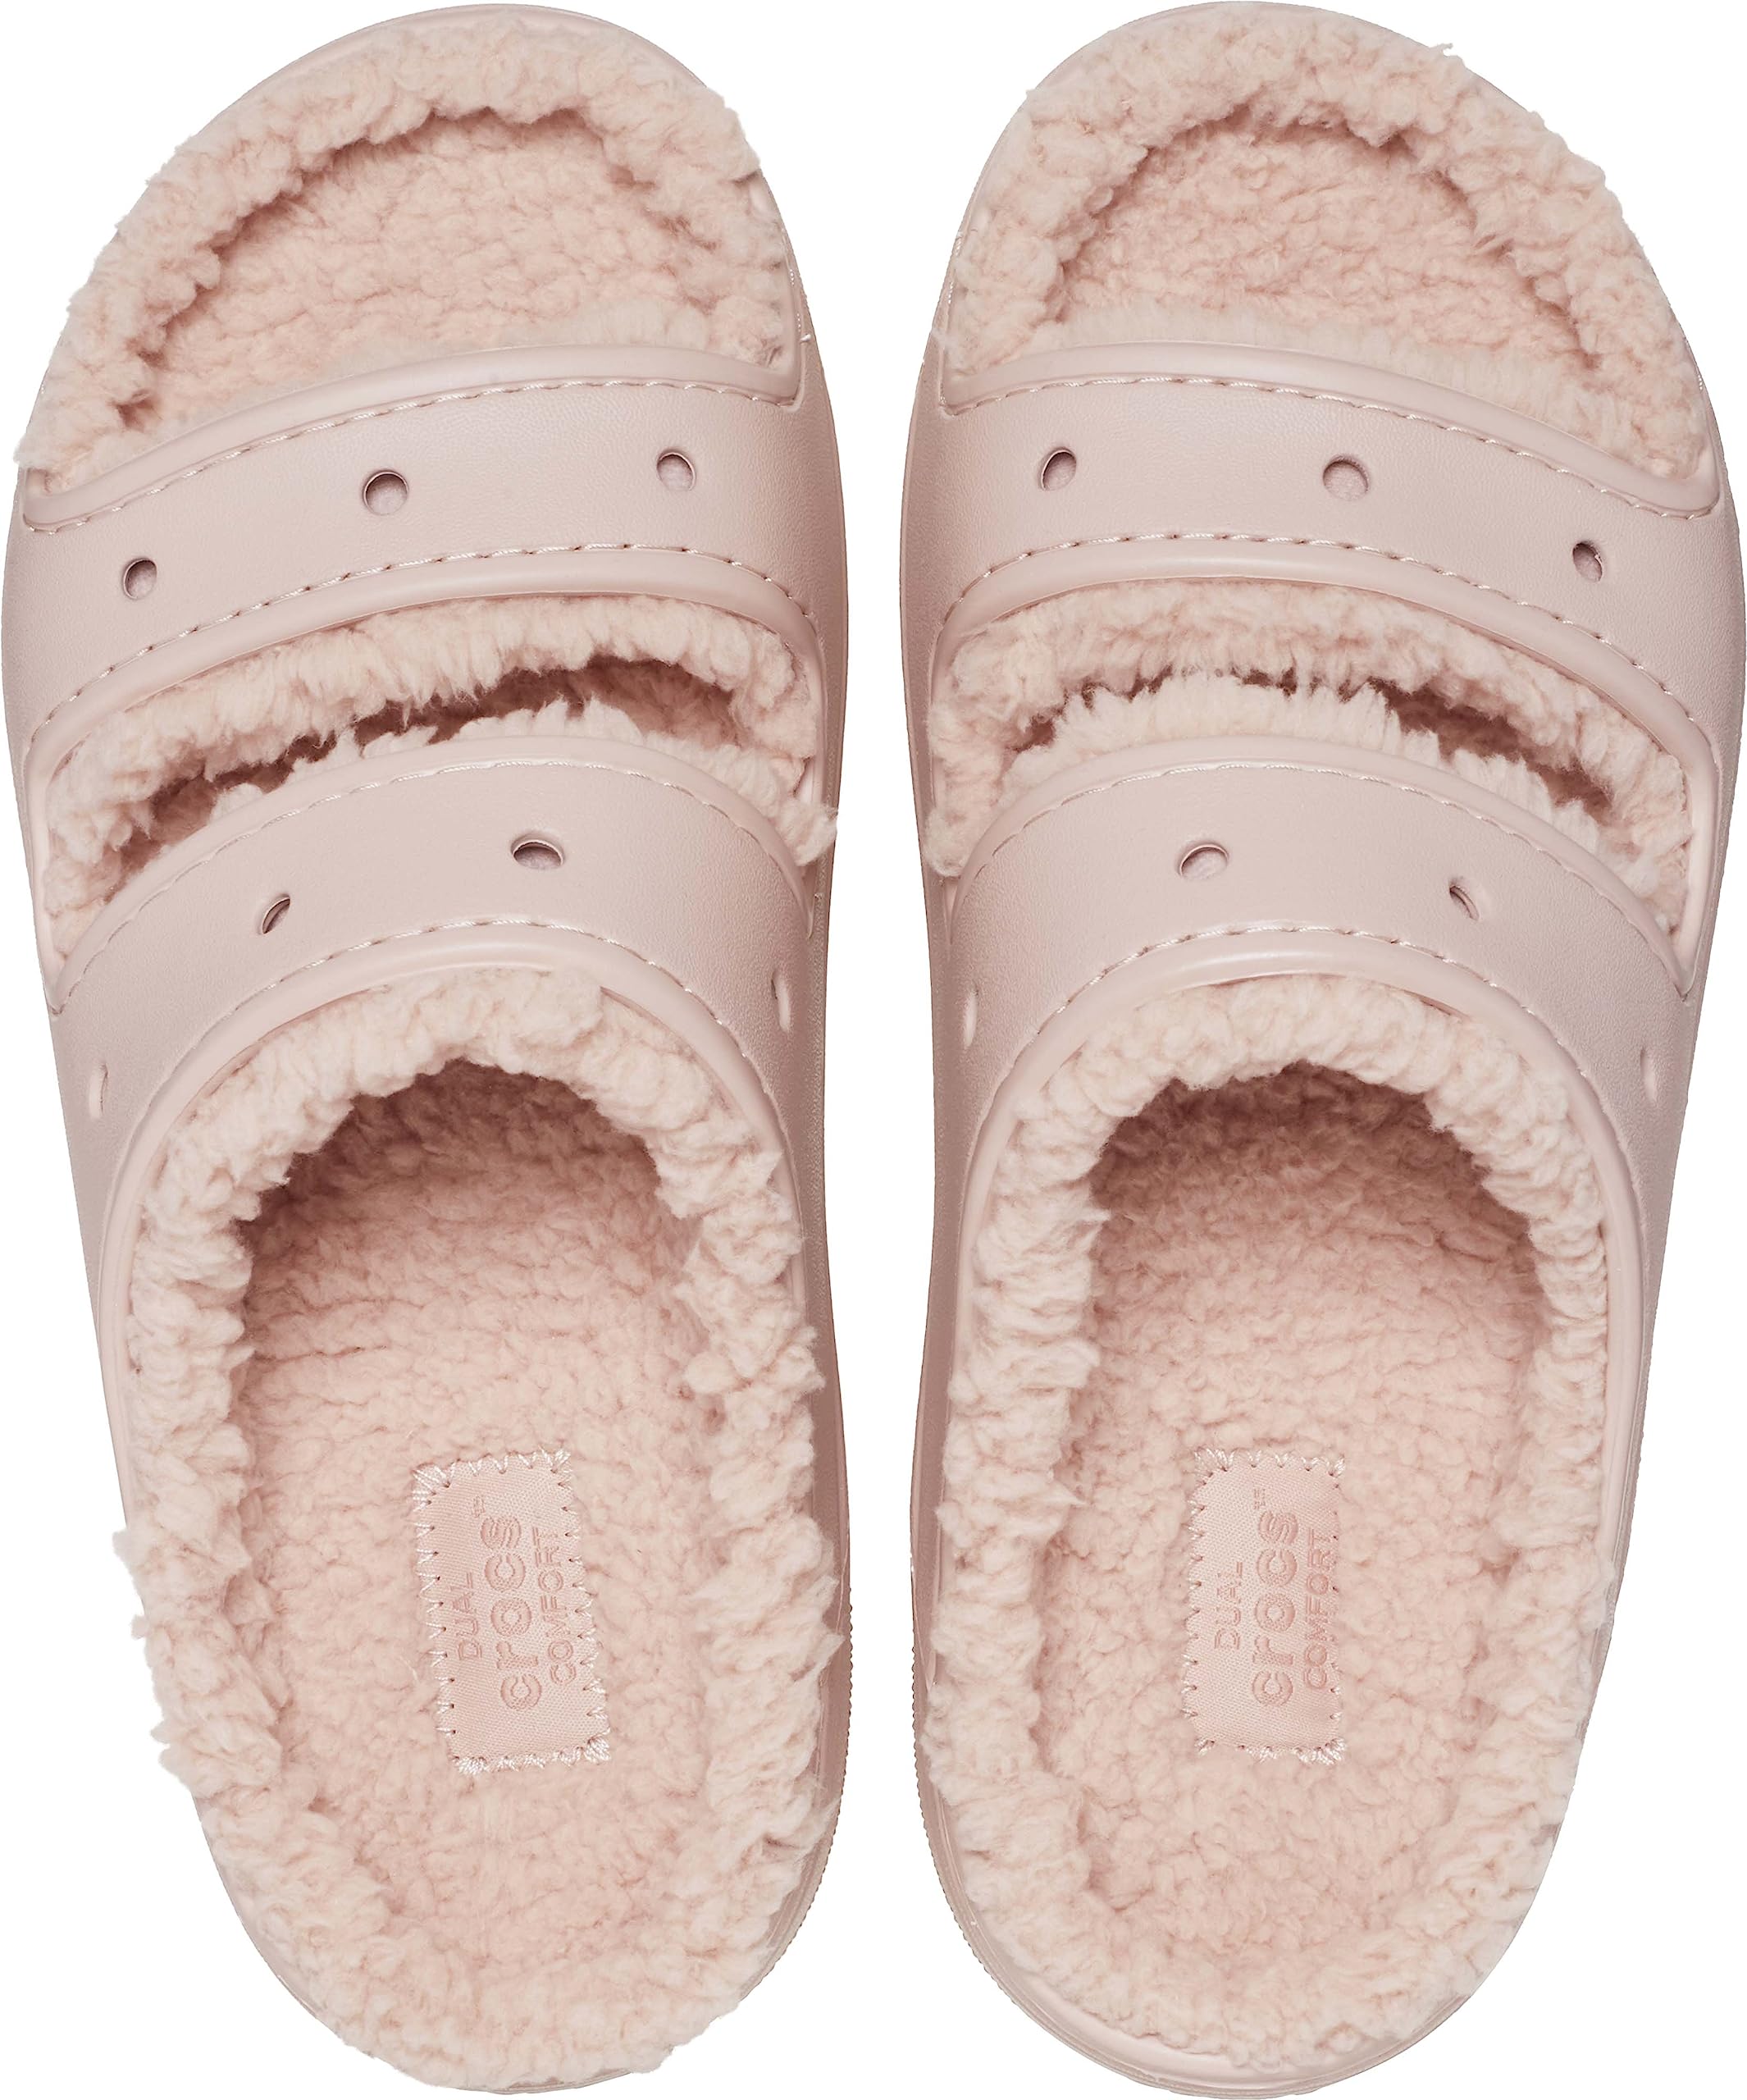 Crocs Unisex Classic Cozzzy Sandals, Fuzzy Slippers and Slides, Pink Clay, 14 US Men